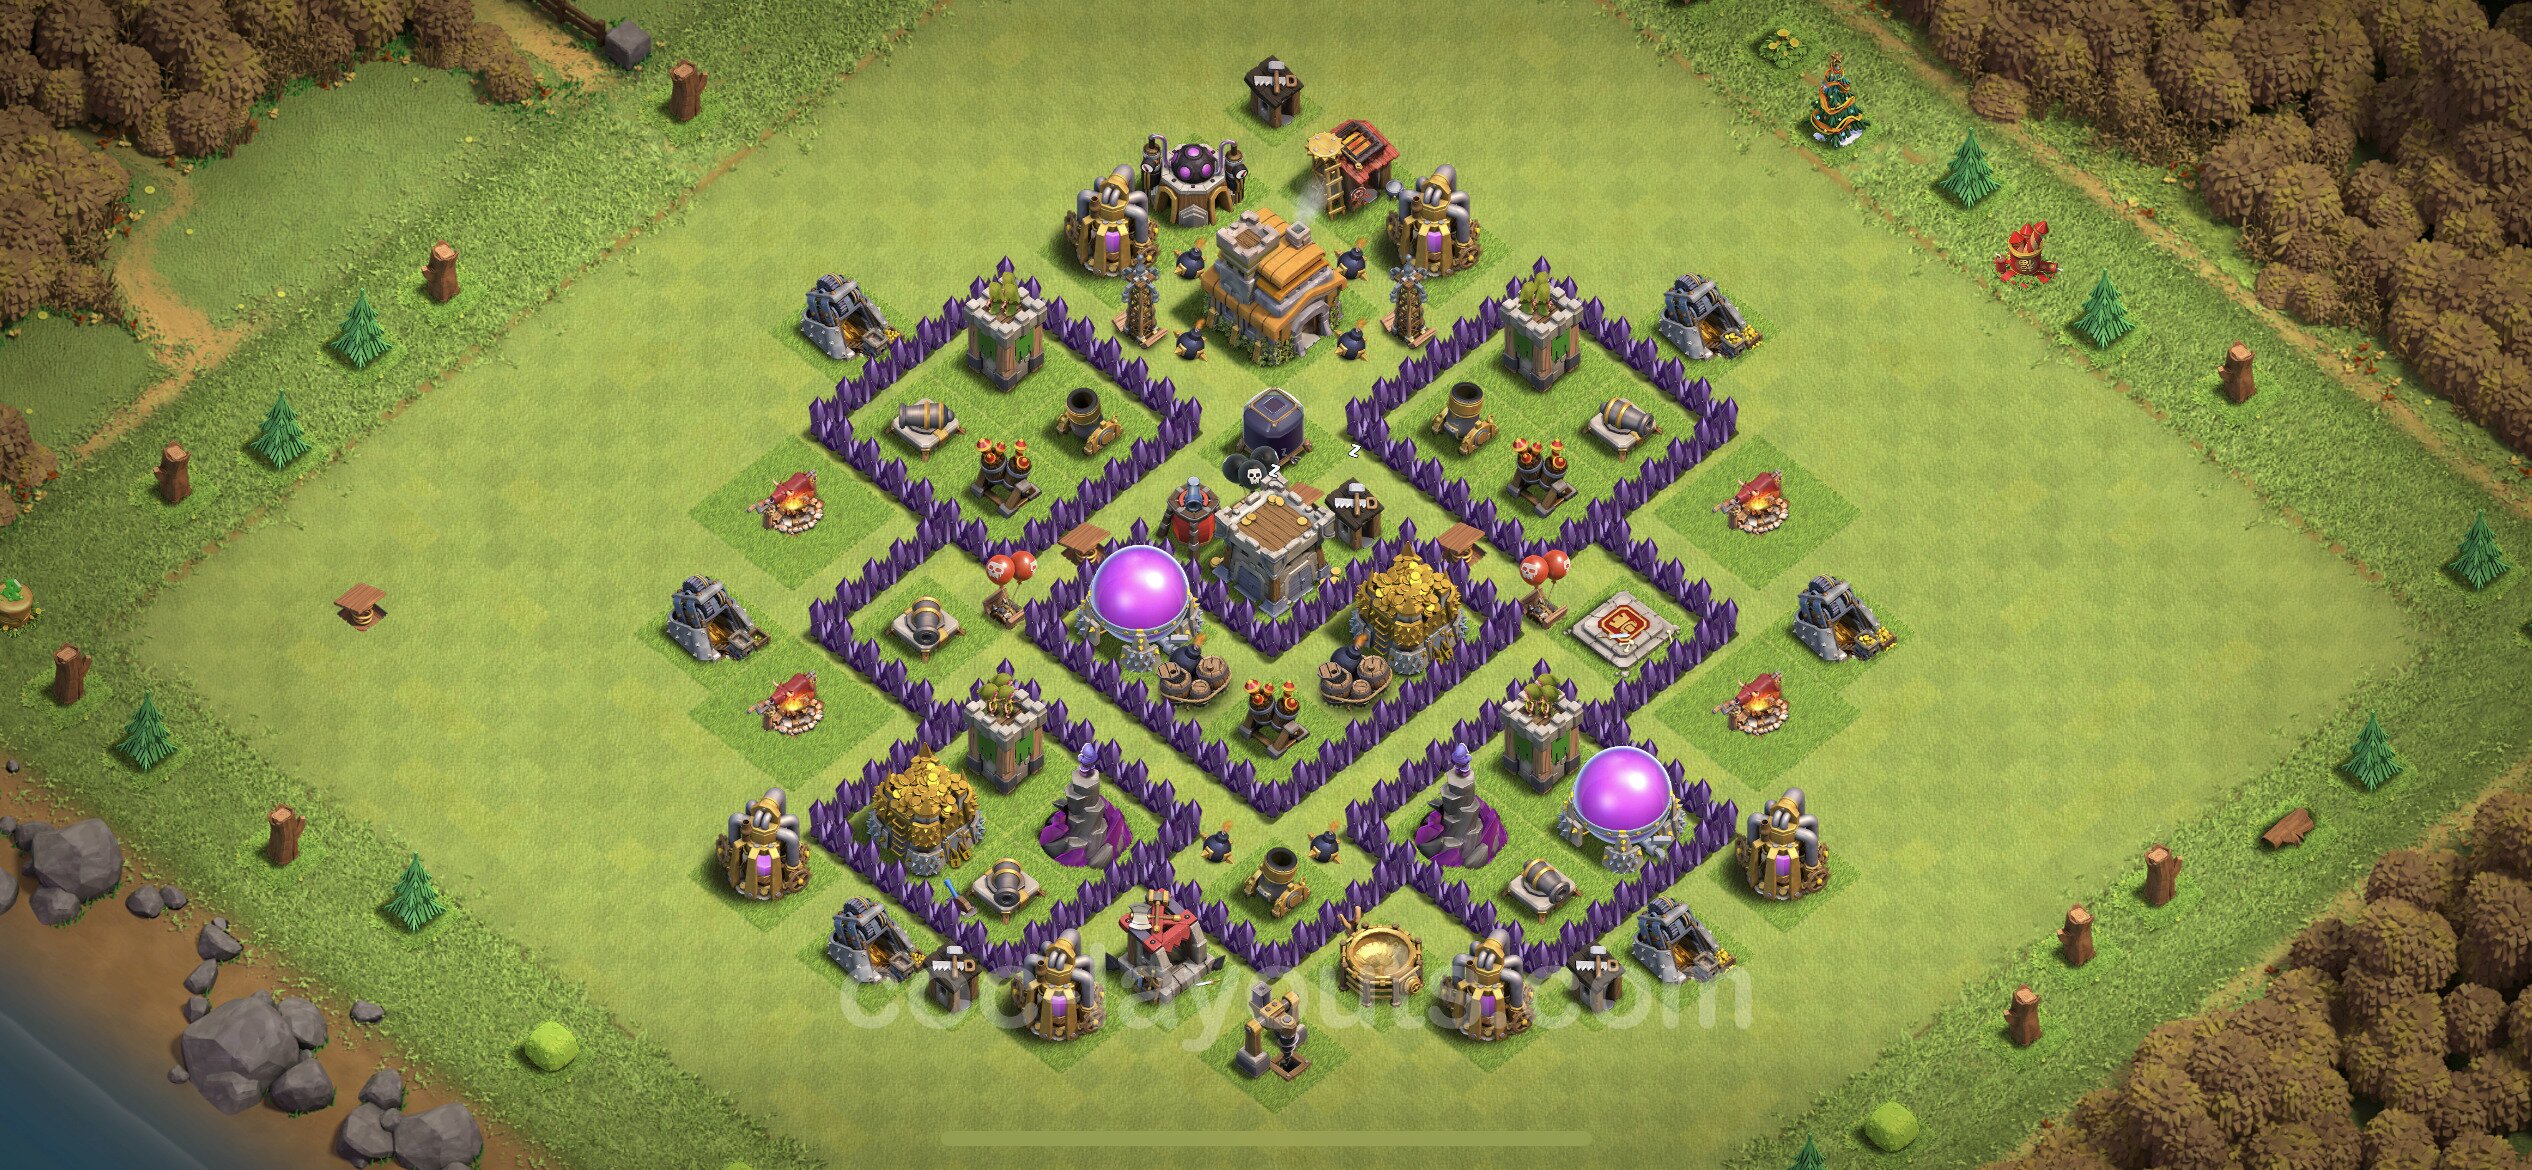 Farming Base TH7 with Link - plan / layout / design - Clash of Clan...